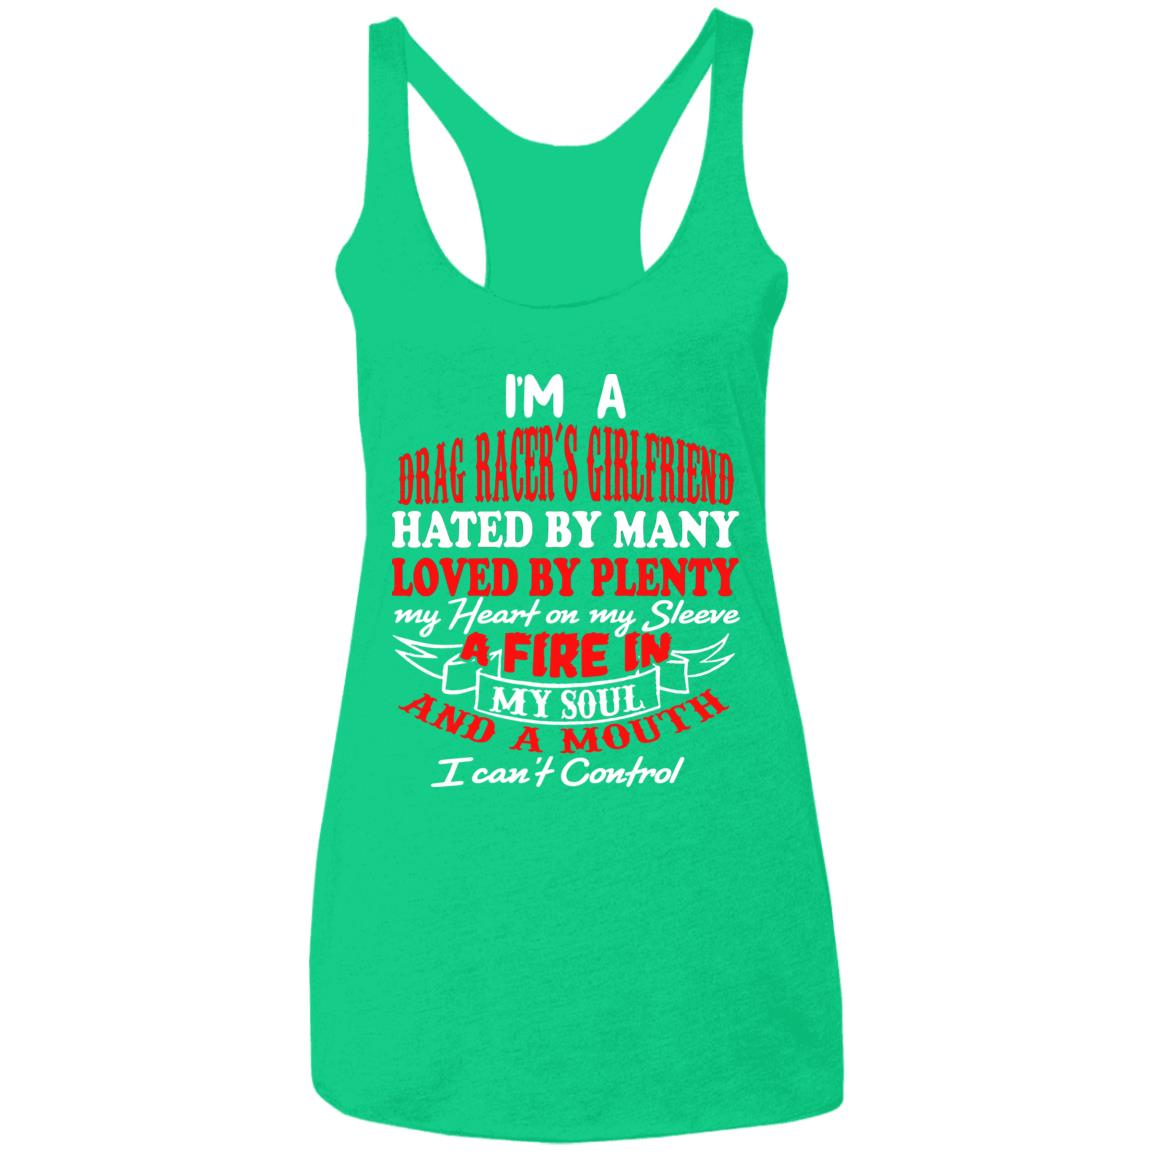 I'm A Drag Racer's Girlfriend Hated By Many Loved By Plenty Ladies' Triblend Racerback Tank